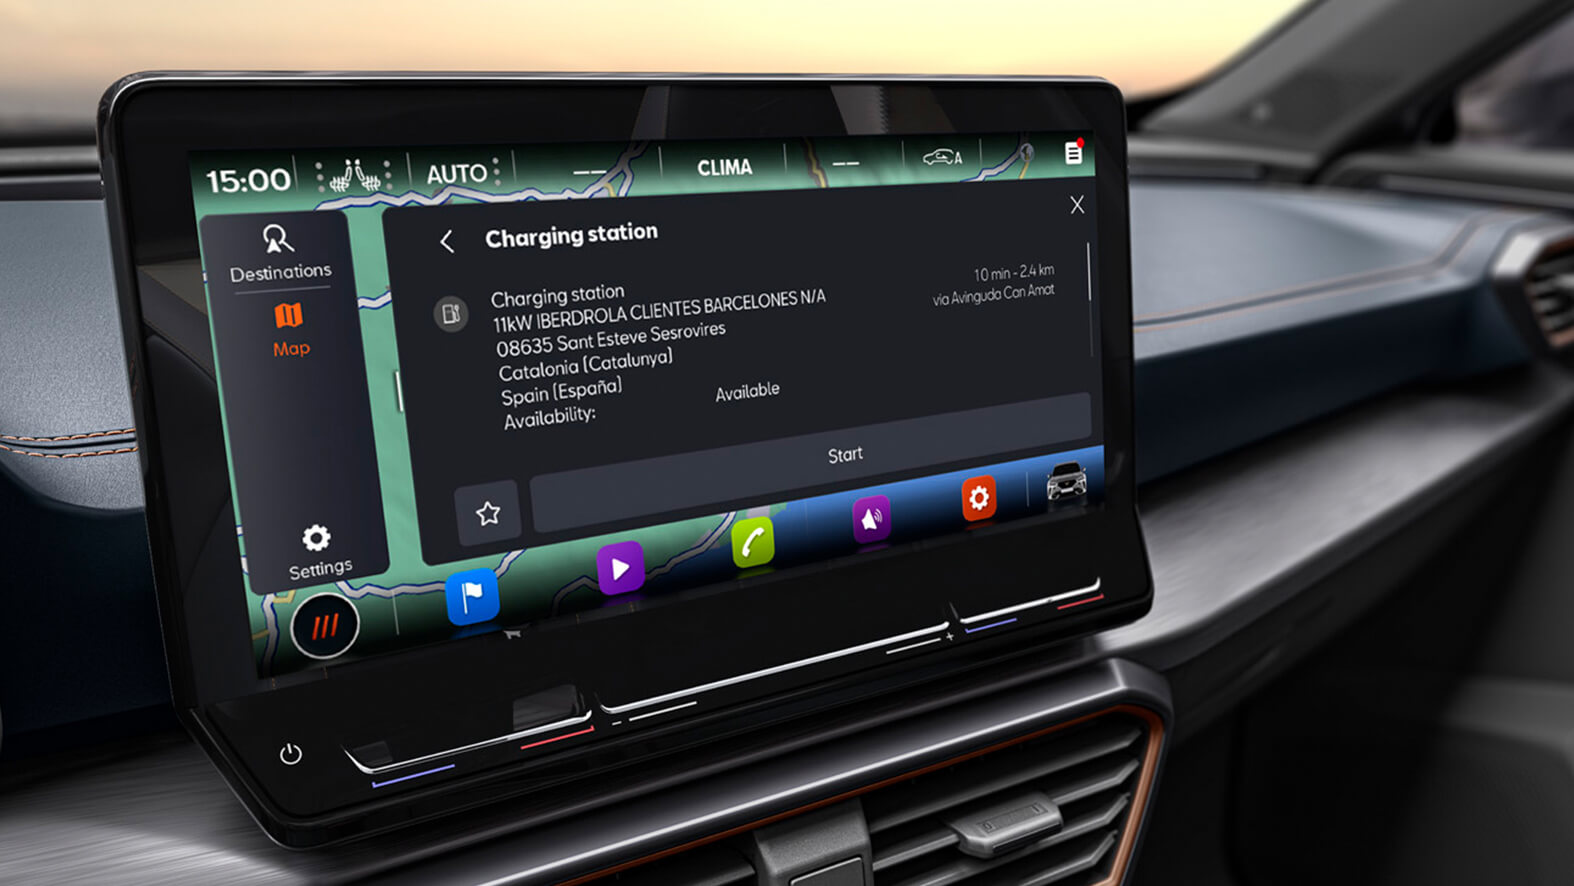 cupra connect voice control infotainment system to locate nearest petrol stations and prices